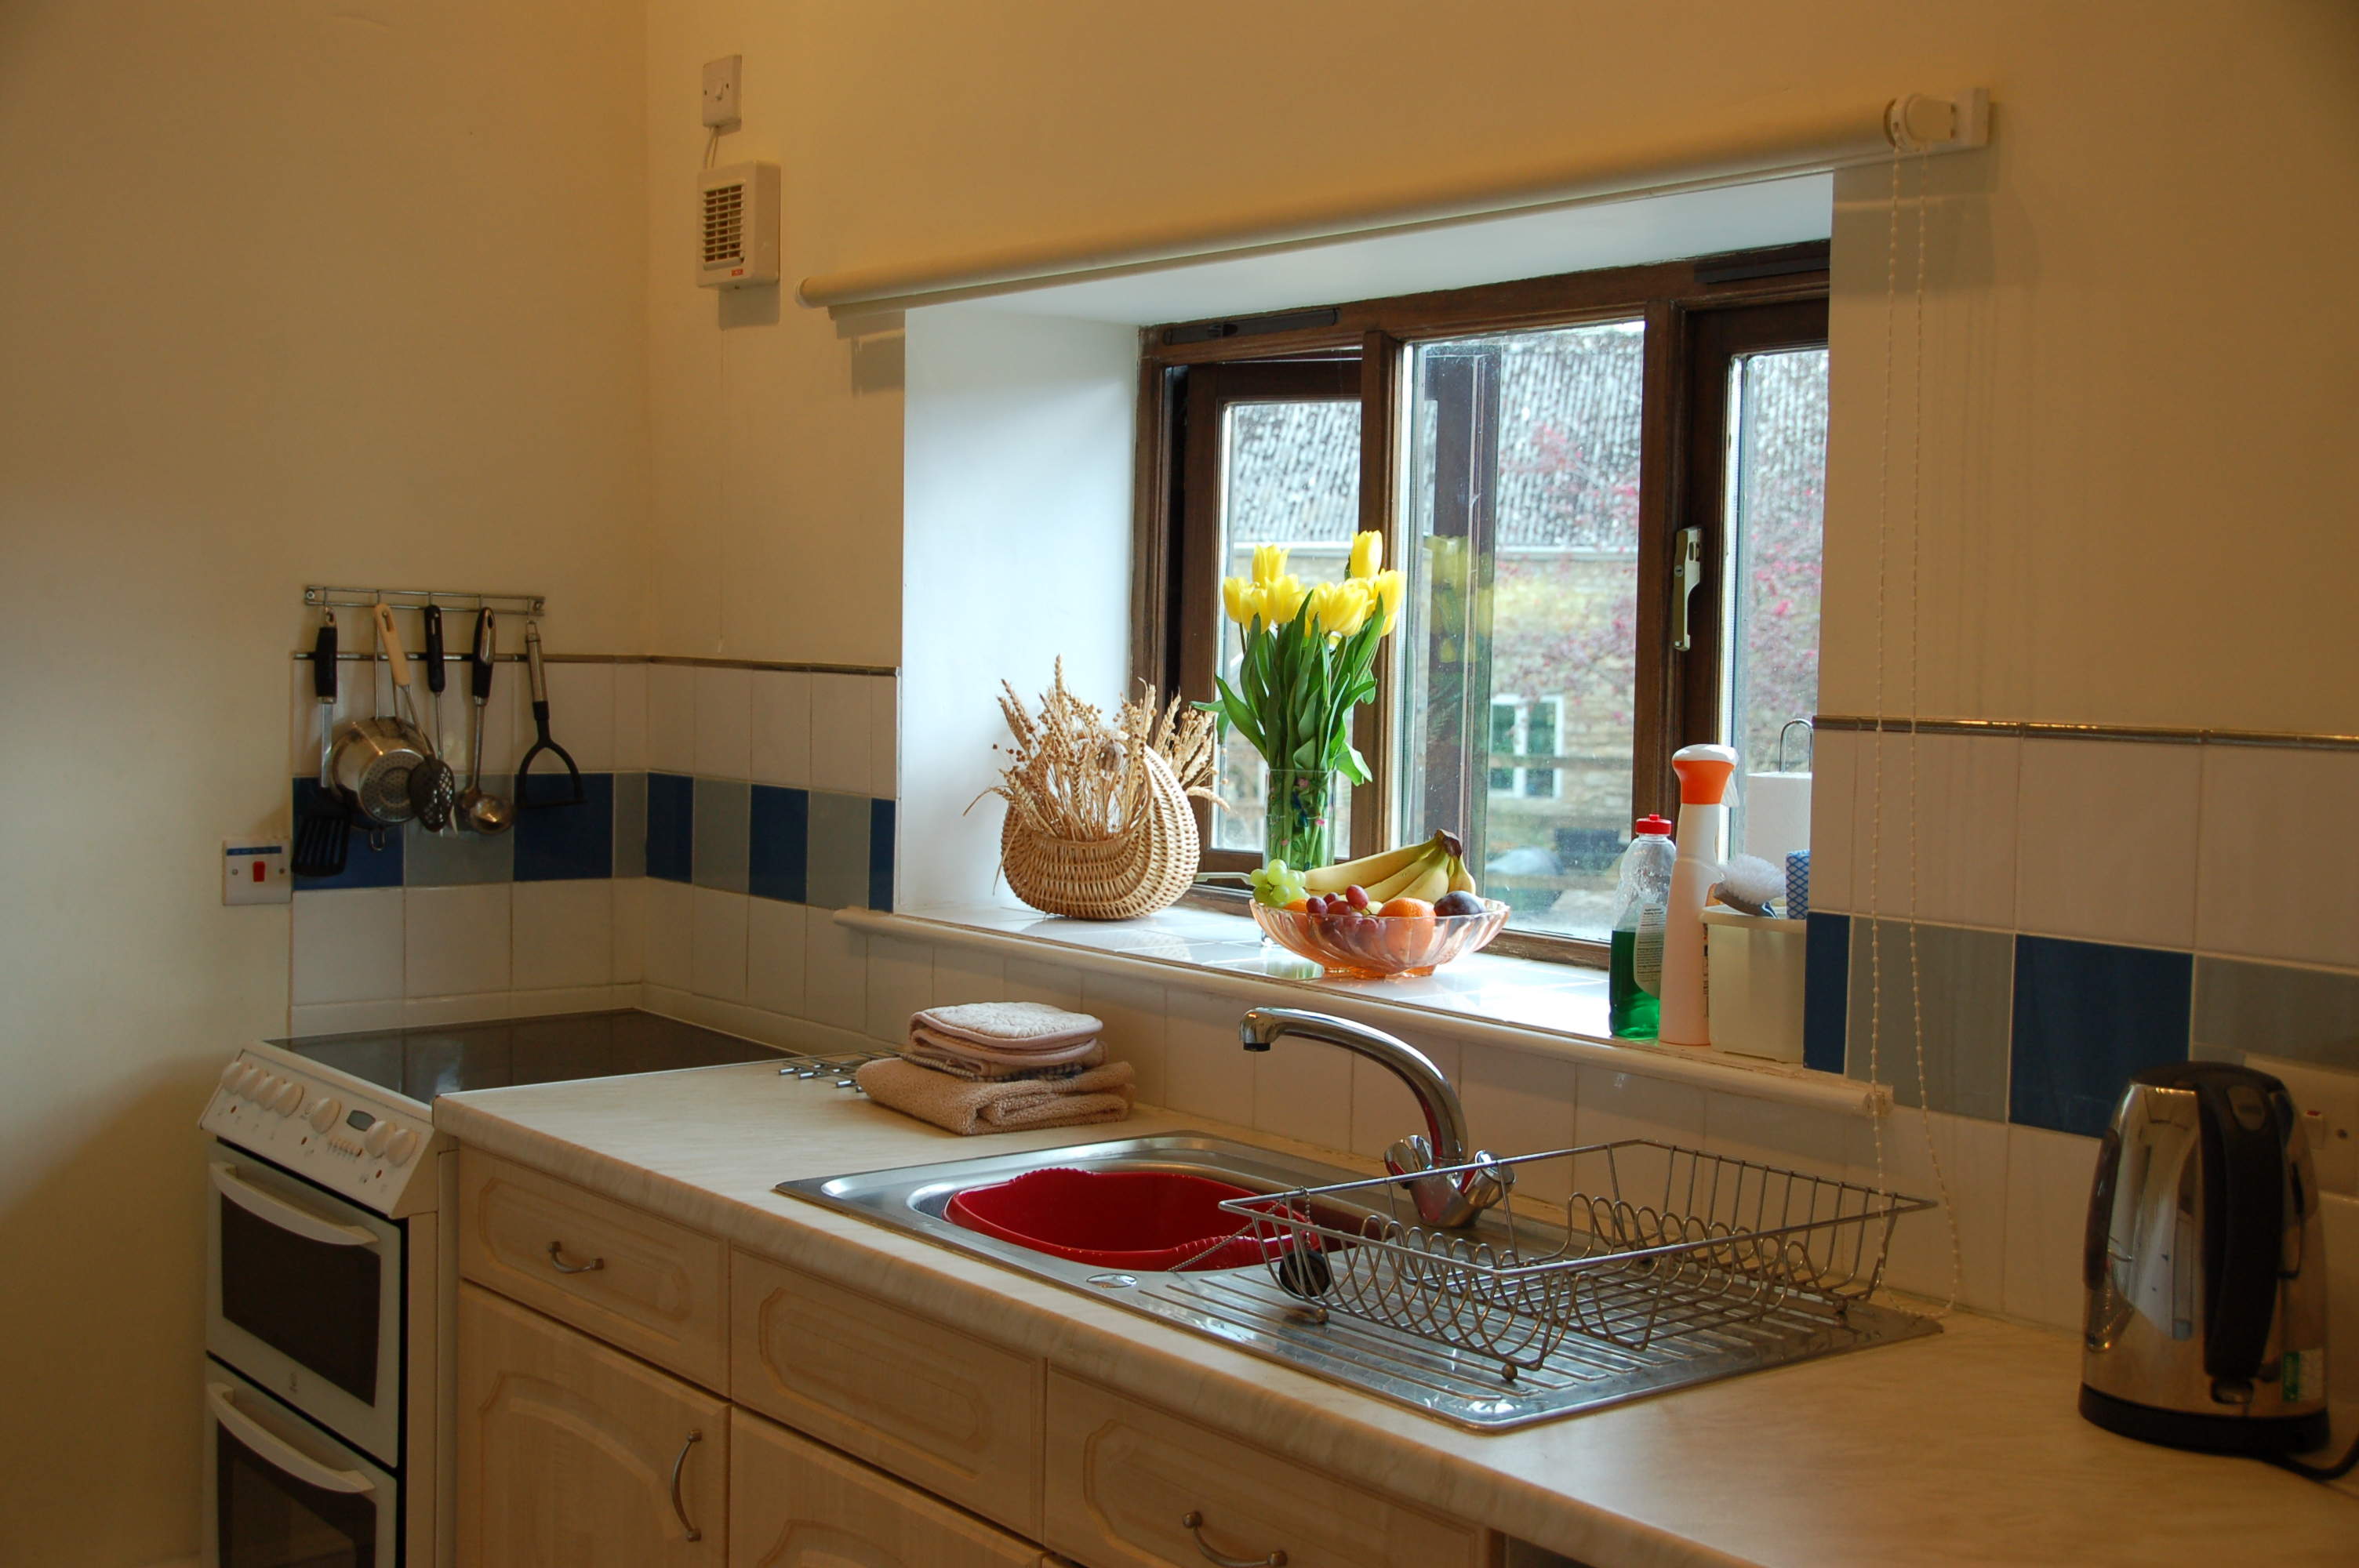 fully fitted kitchen with full size oven with ceramic hob, microwave, full size fridge freezer